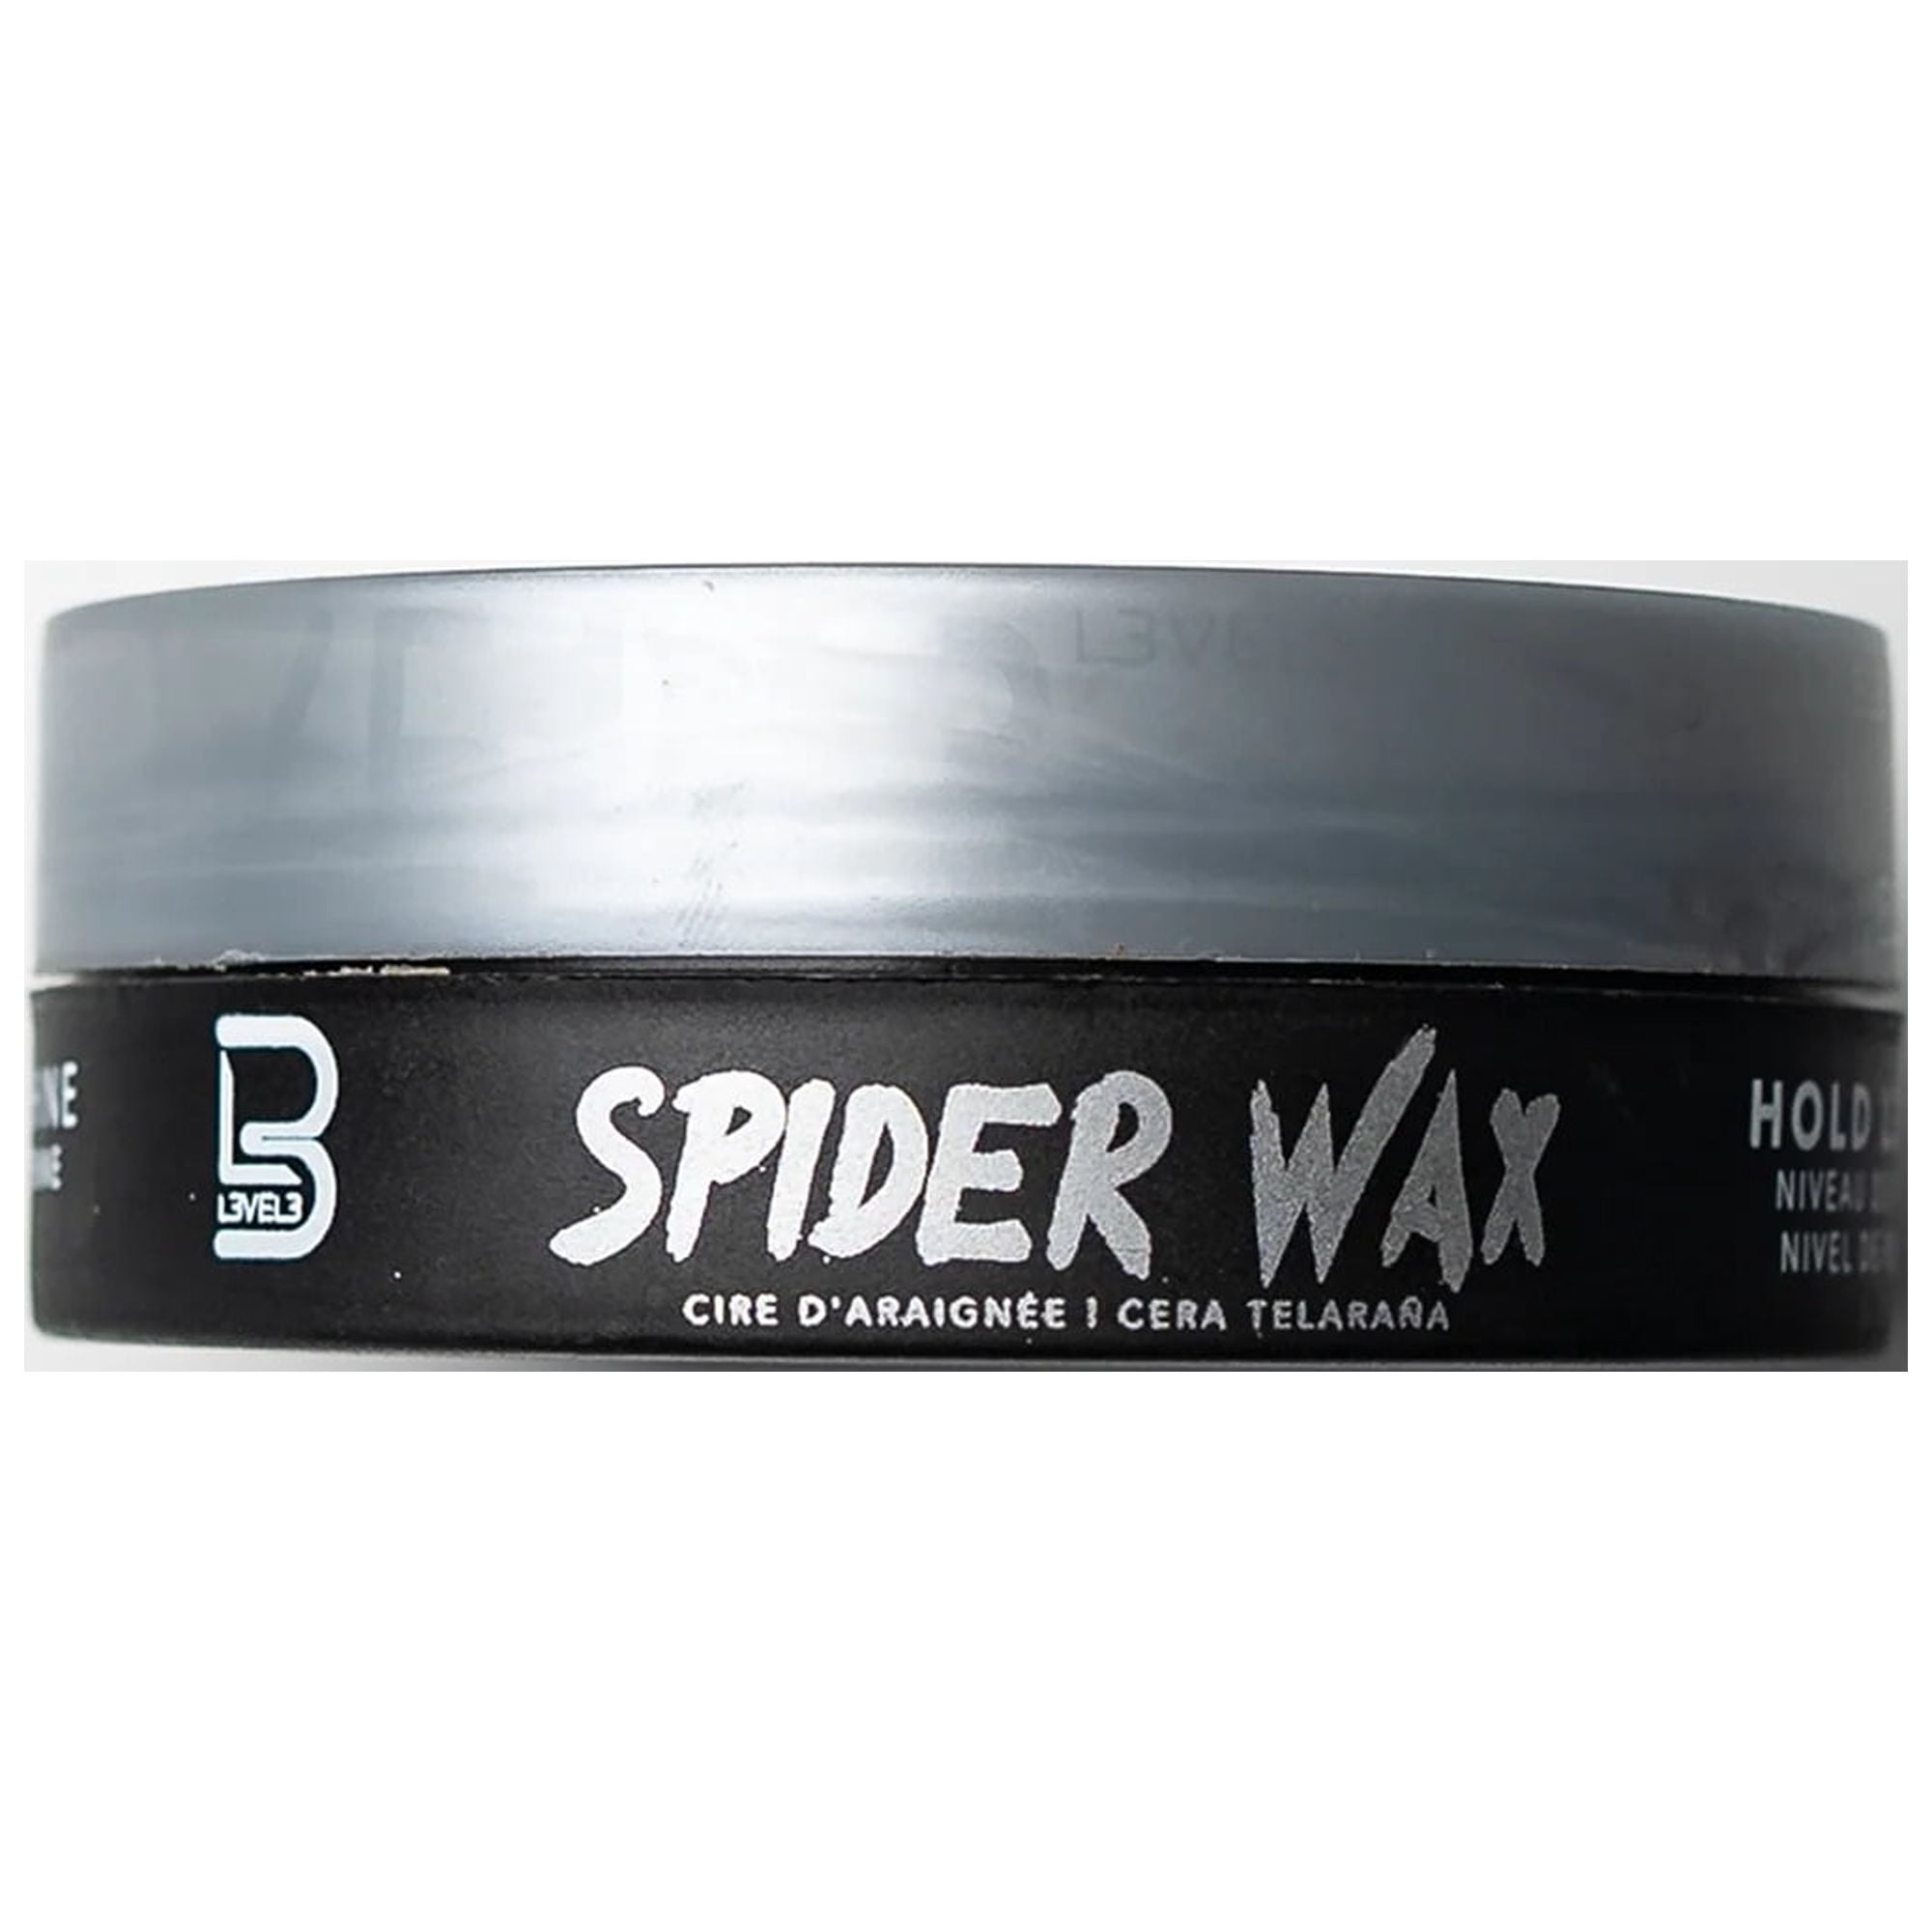 Hair Styling Spider Wax - #3 Extreme Look - 175ml